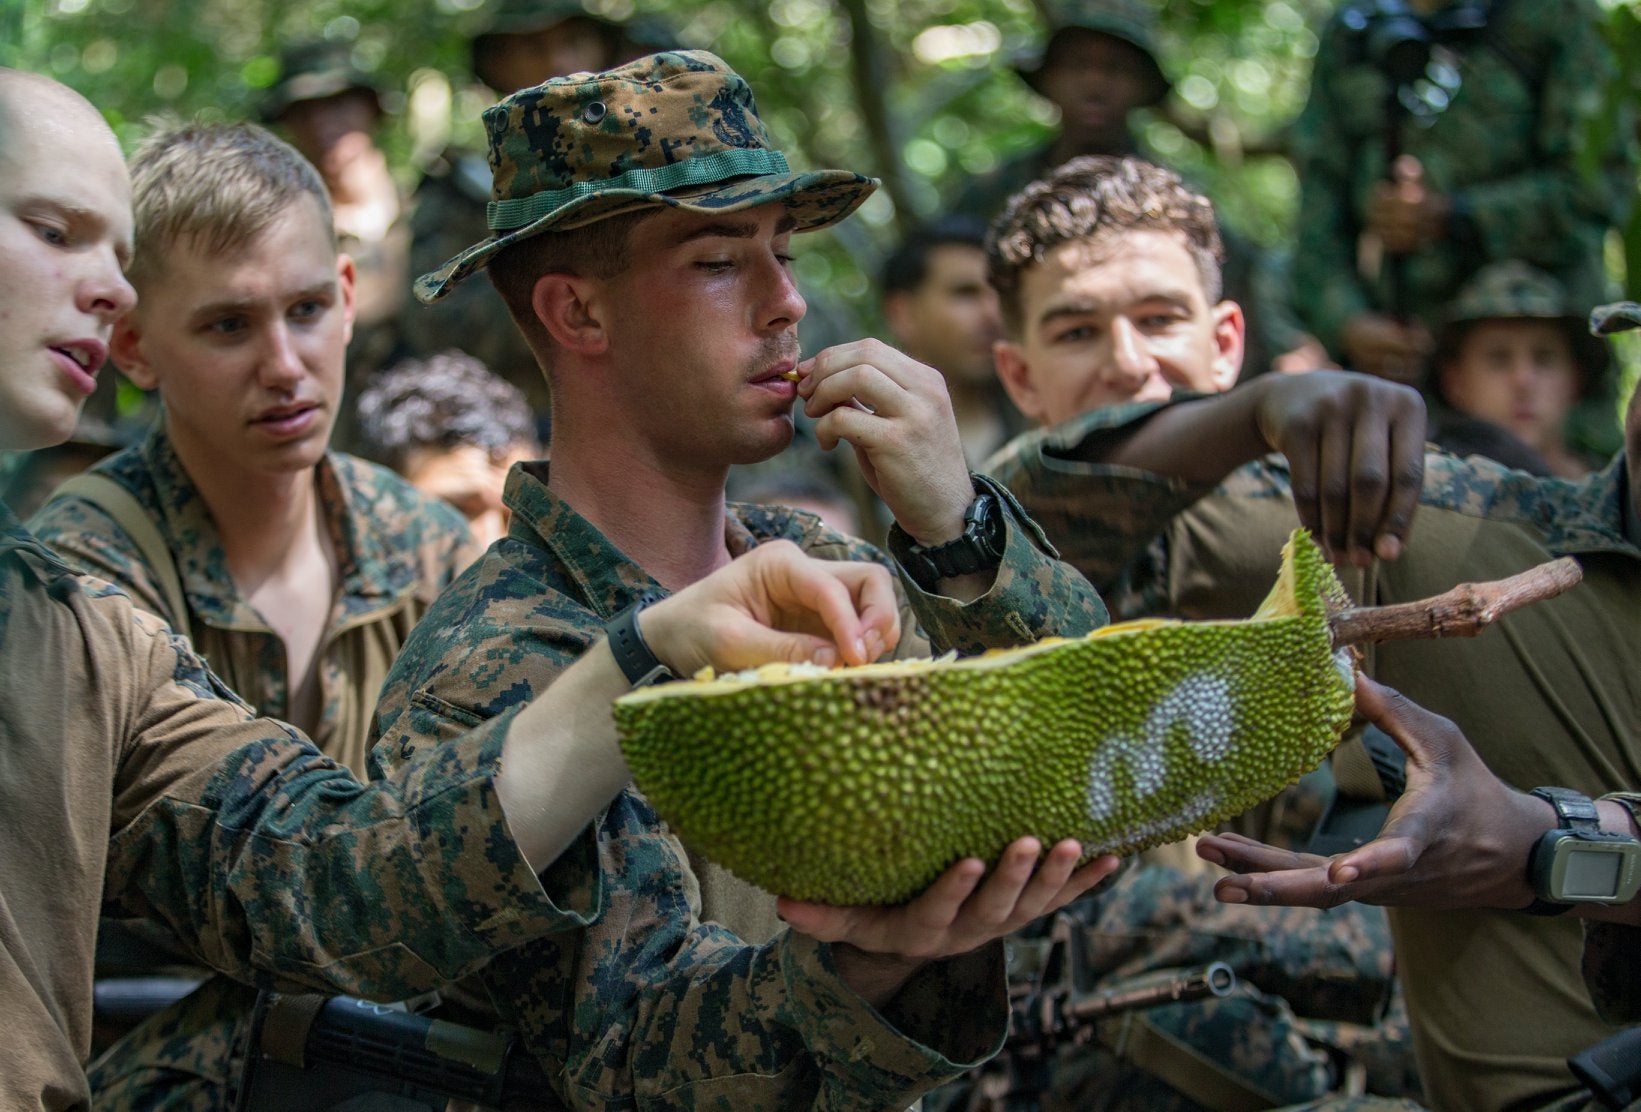 These Soldiers Were Given Durian to Eat As Part of 'Jungle Survival Techniques' - WORLD OF BUZZ 1